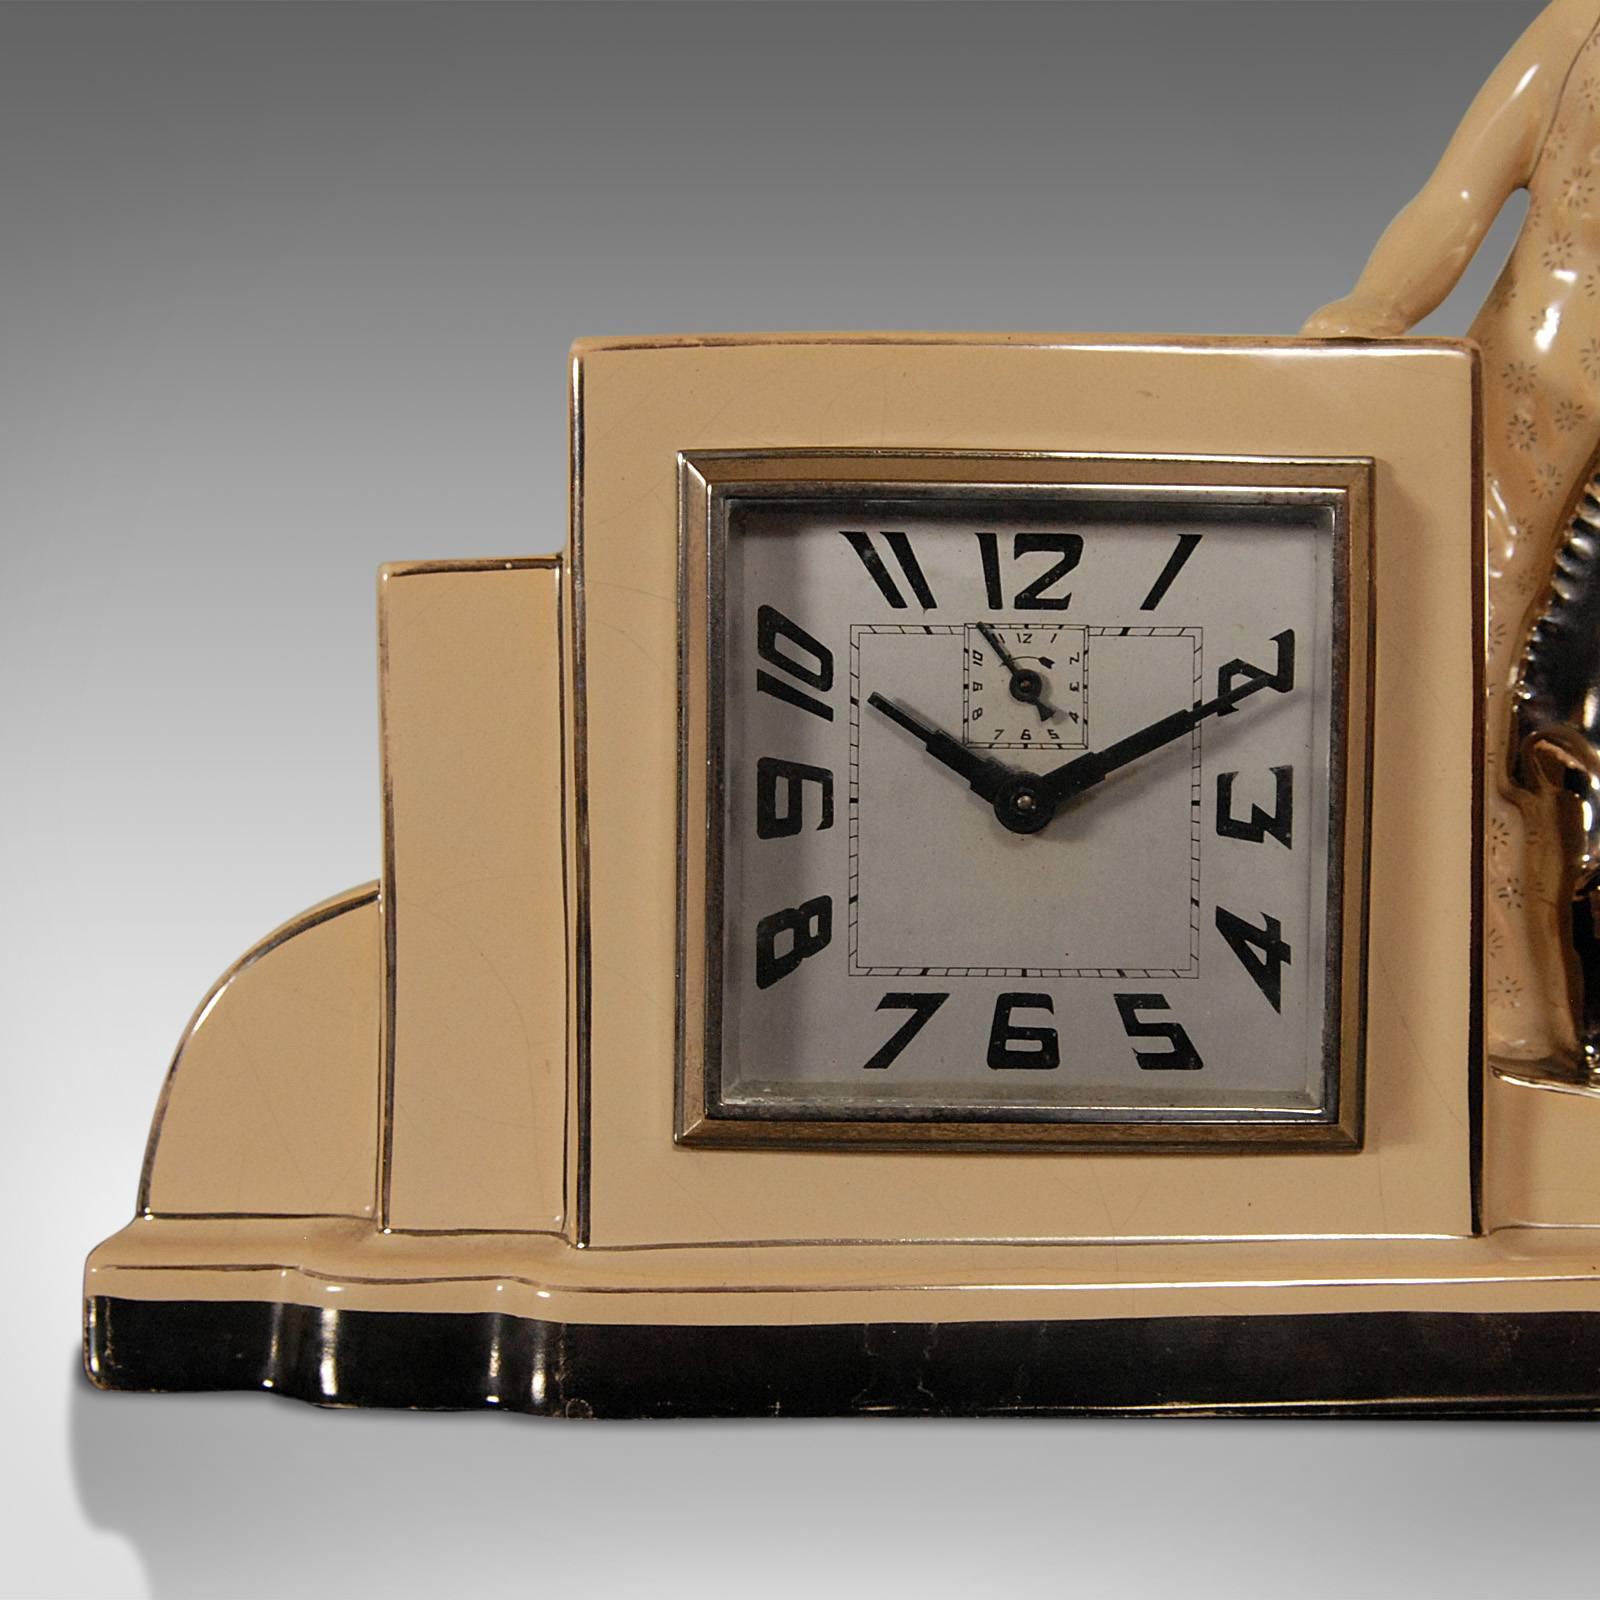 Ceramic Art Deco Clock and Garnitures, French ODYV Timepiece, Working with Alarm